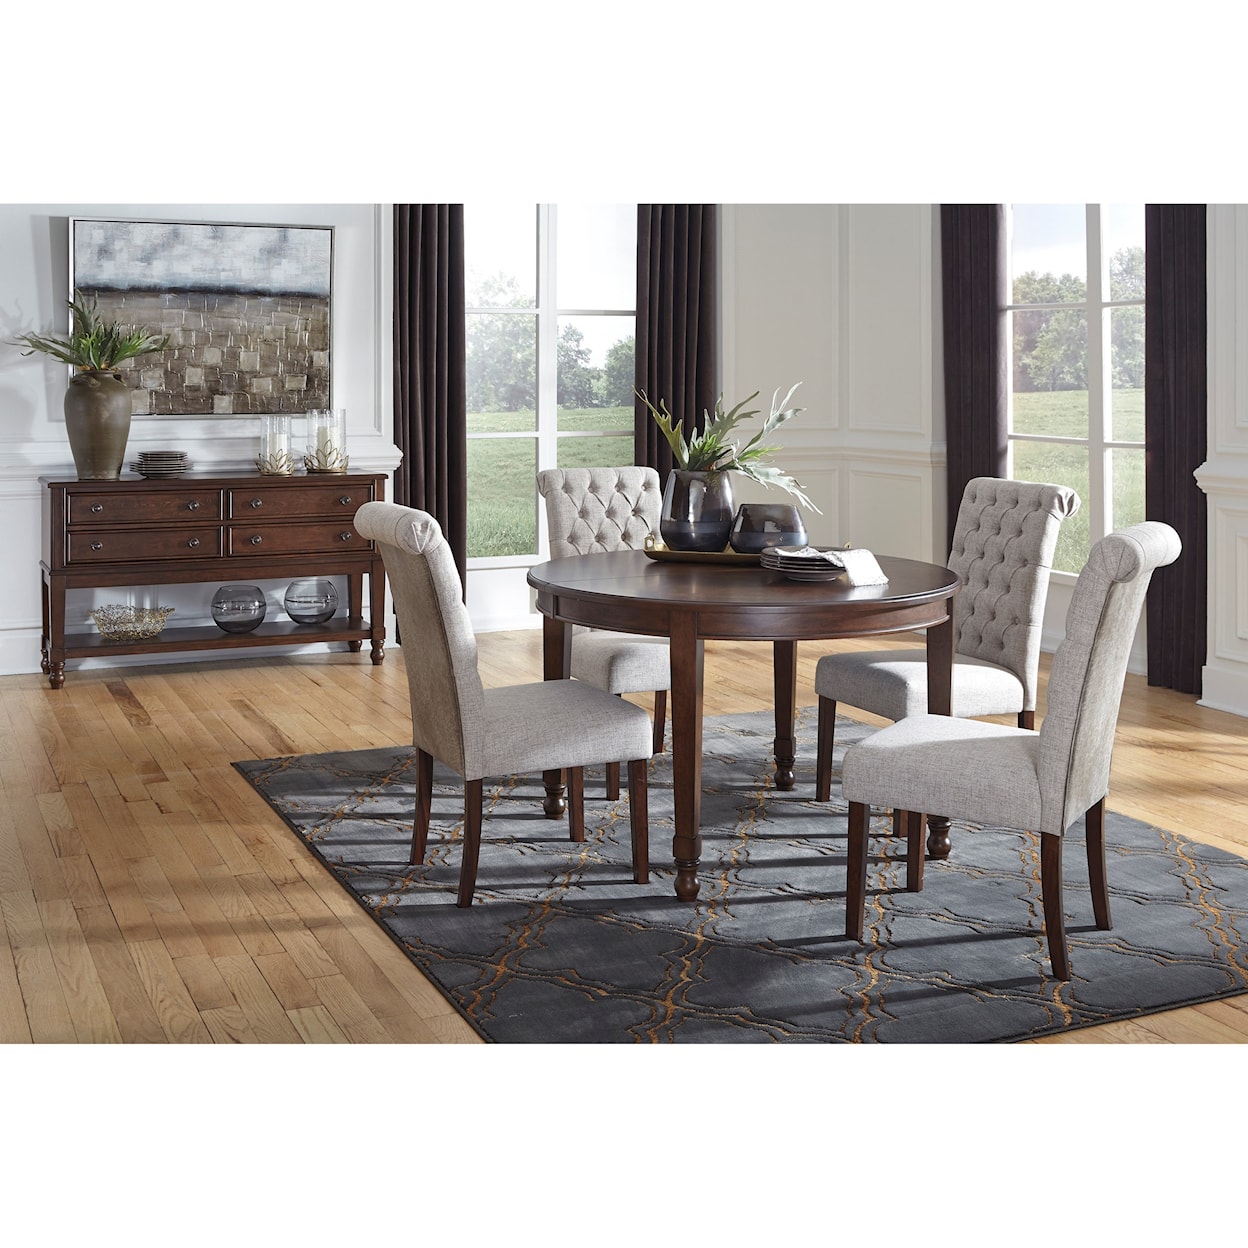 StyleLine Adinton Casual Dining Room Group